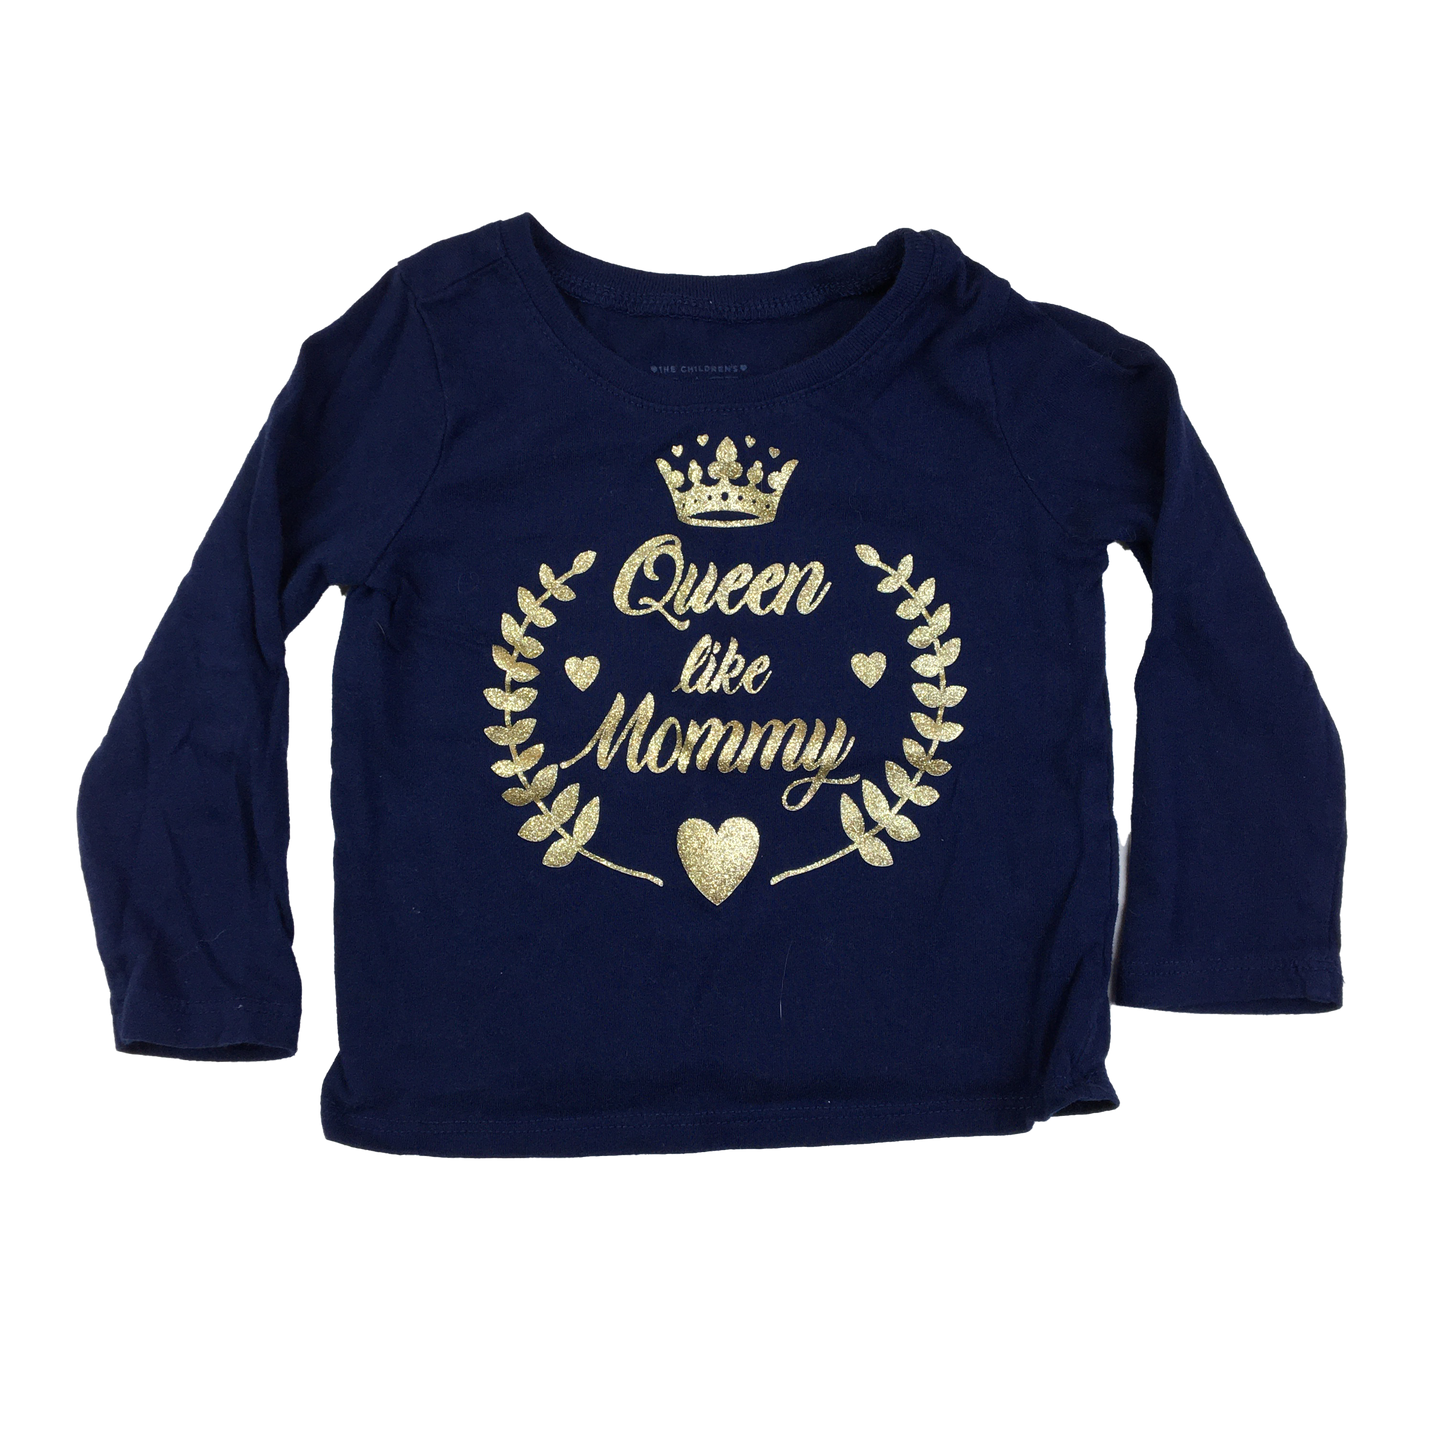 The Children's Place Navy Long Sleeve Shirt "Queen Like Mommy" 12-18M